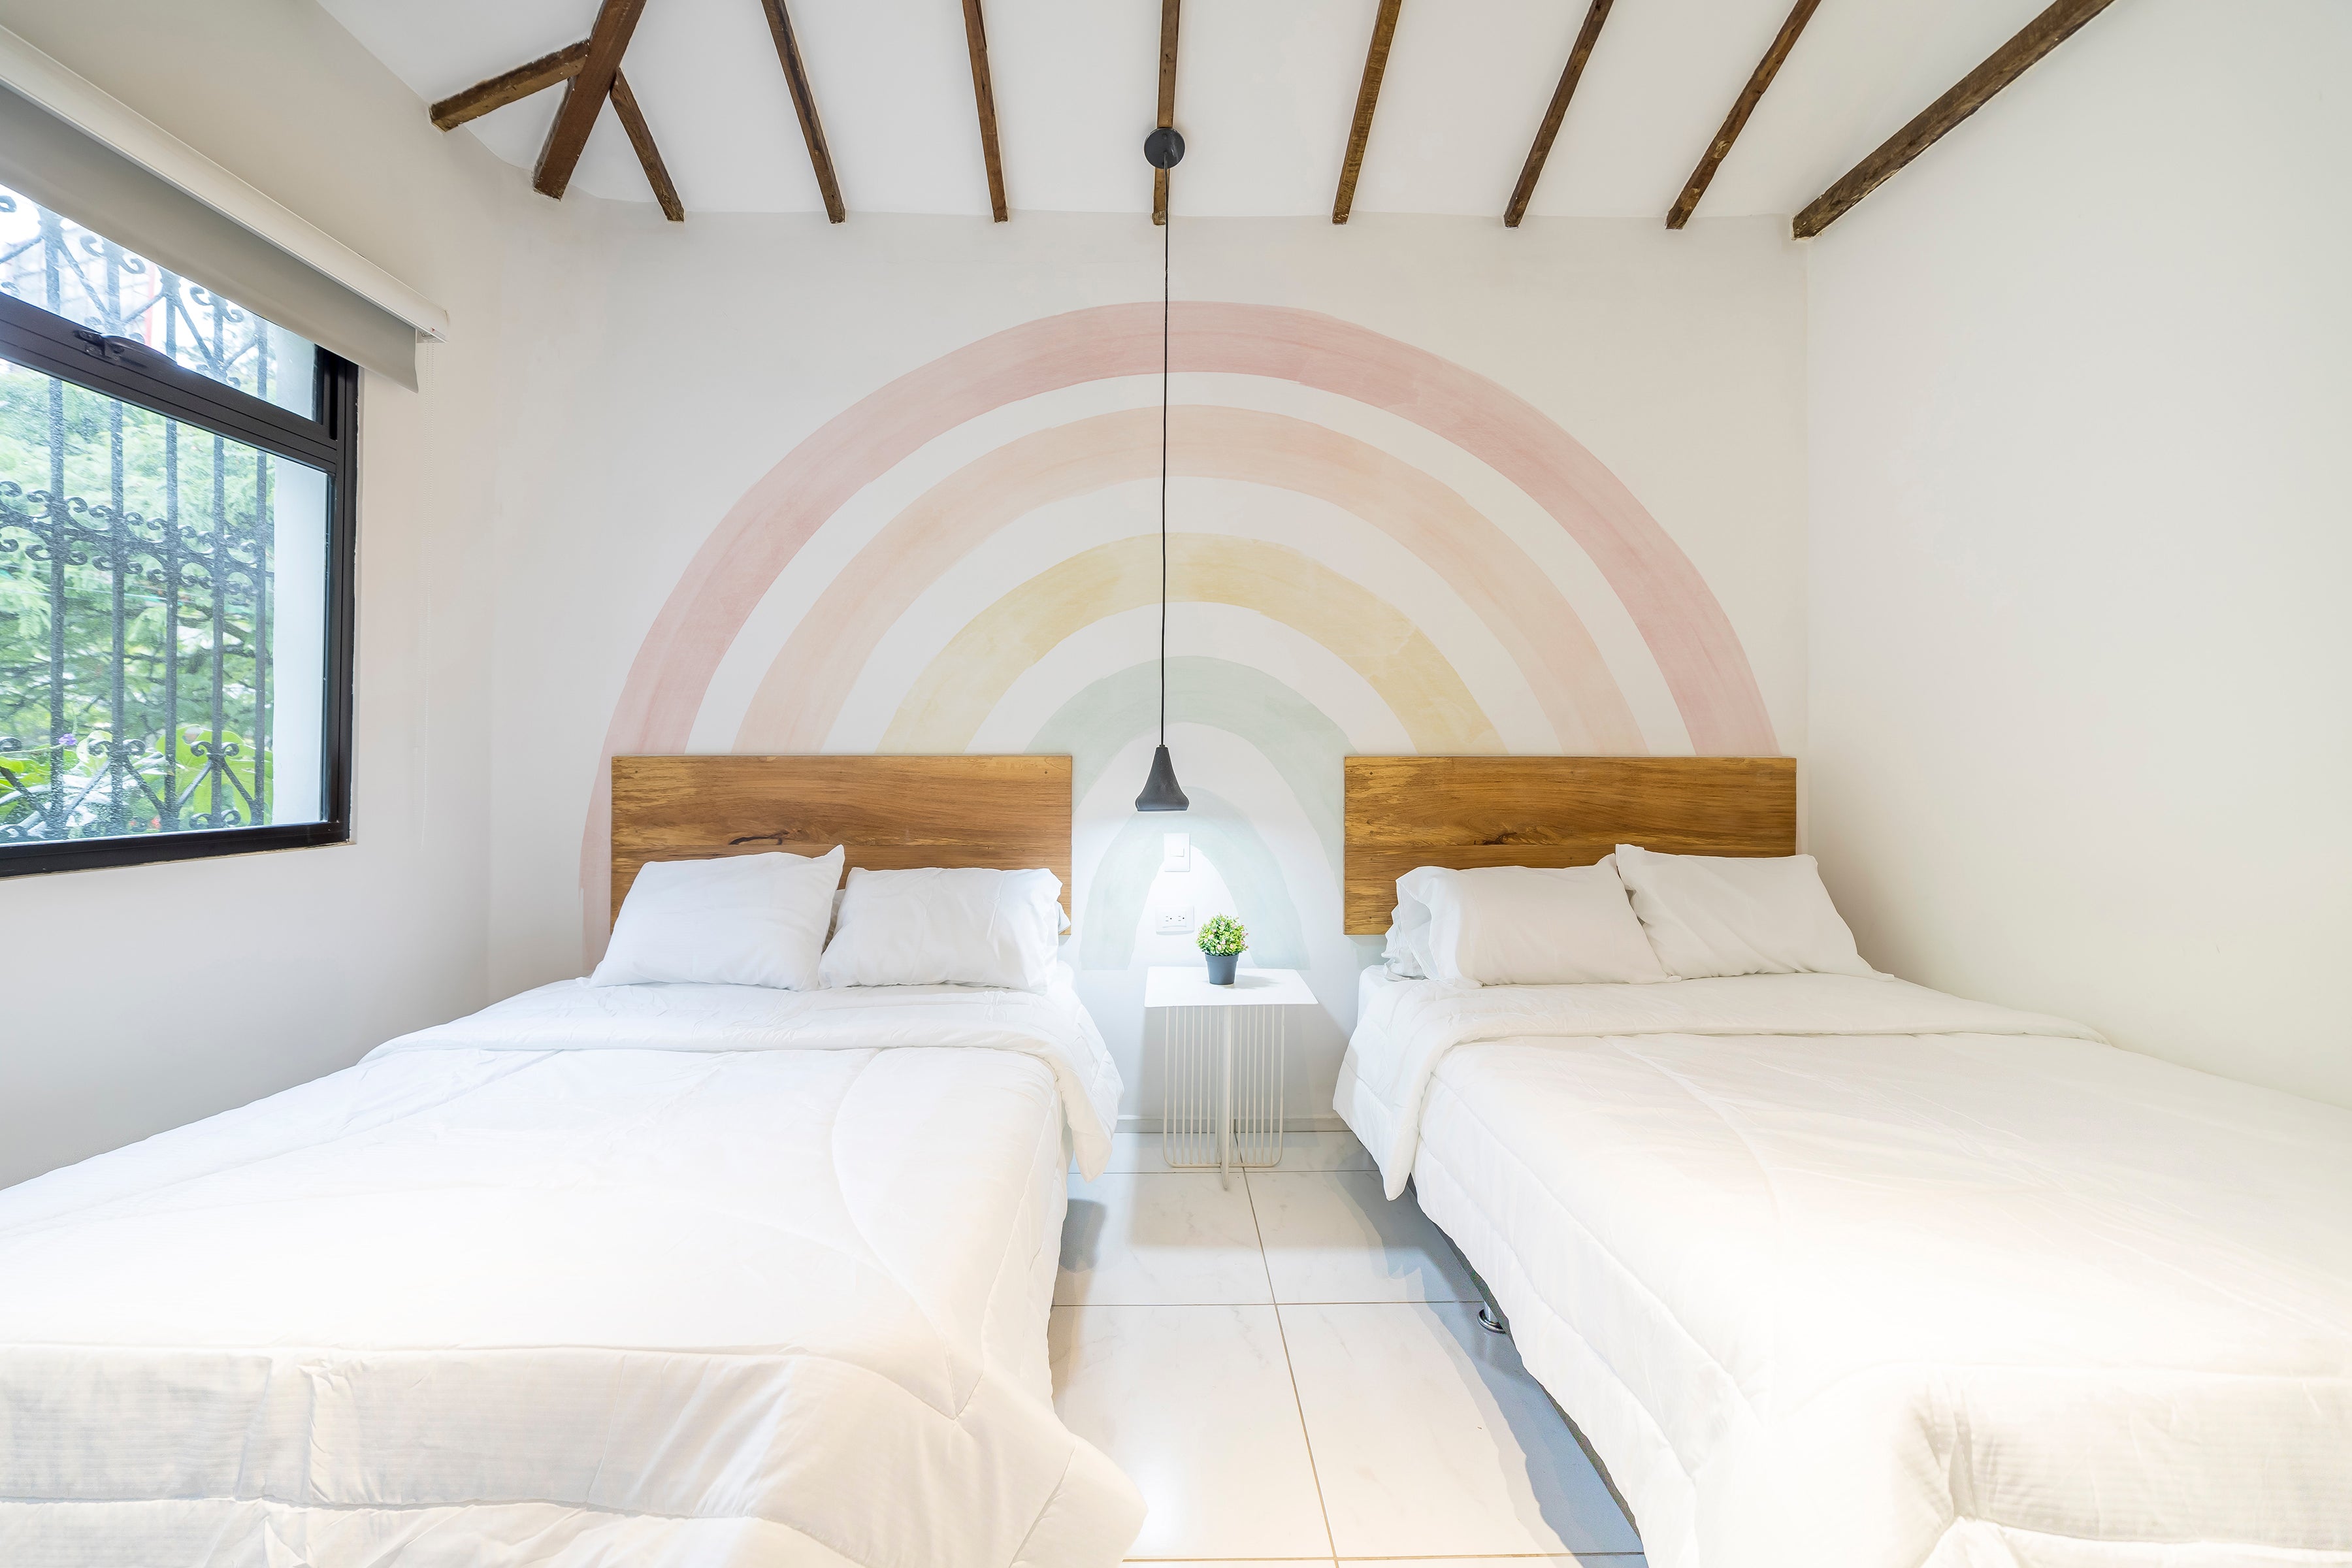 A serene bedroom with two single beds and wooden headboards against a wall featuring a large pastel rainbow mural with soft arcs of pink, peach, yellow, and green hues.